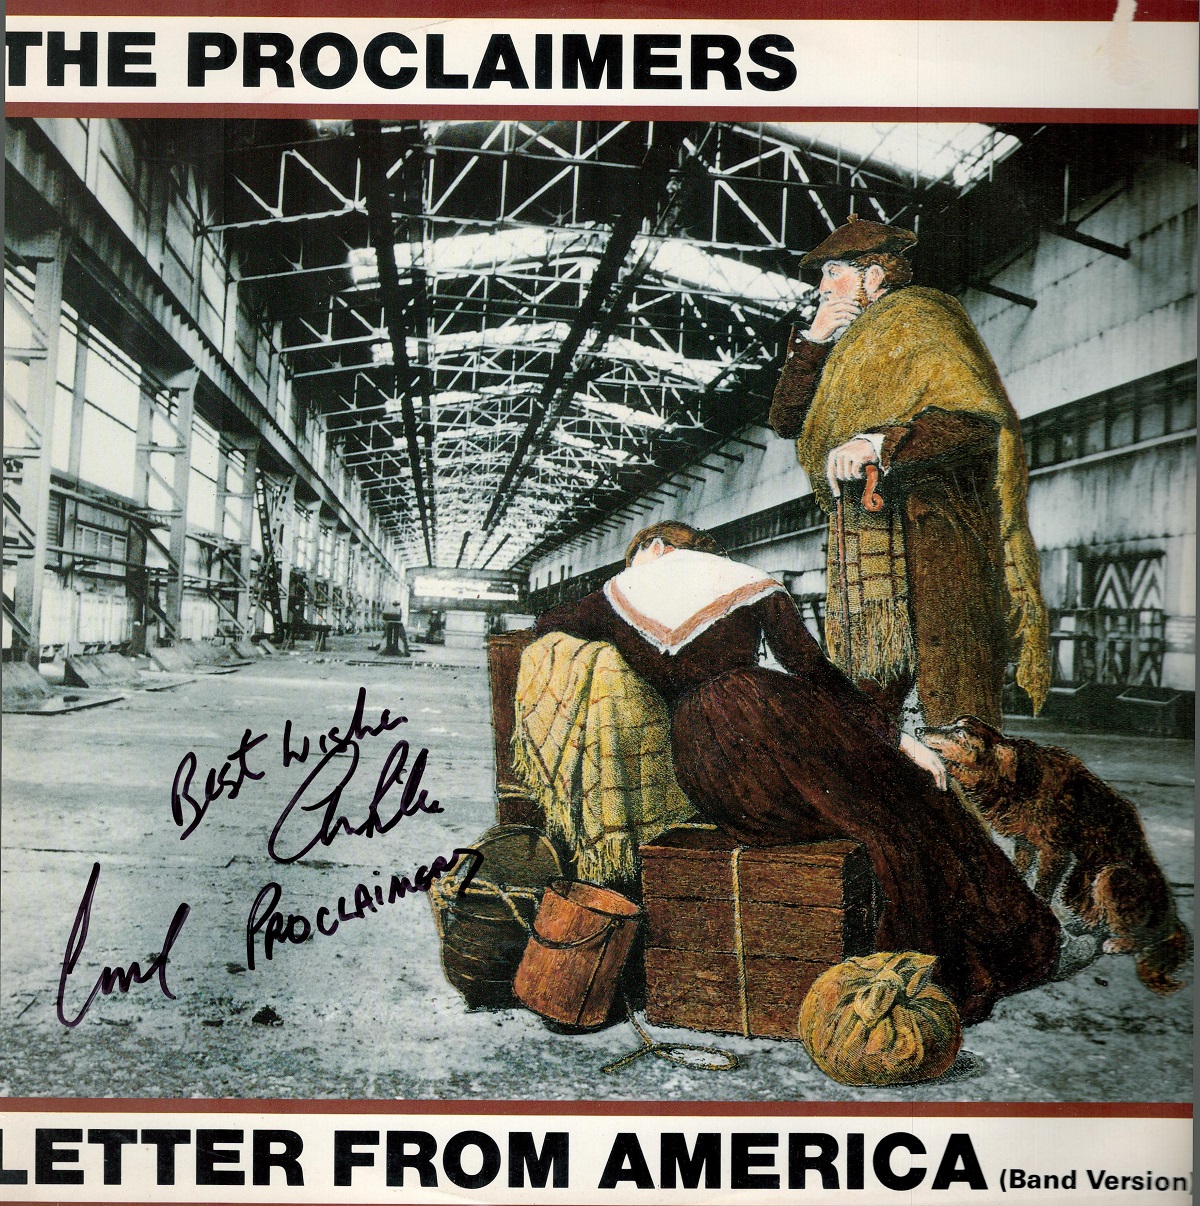 The Proclaimers Signed By Charlie & Craig Reid 12 Inch Record 'Letter From America'. Good condition.